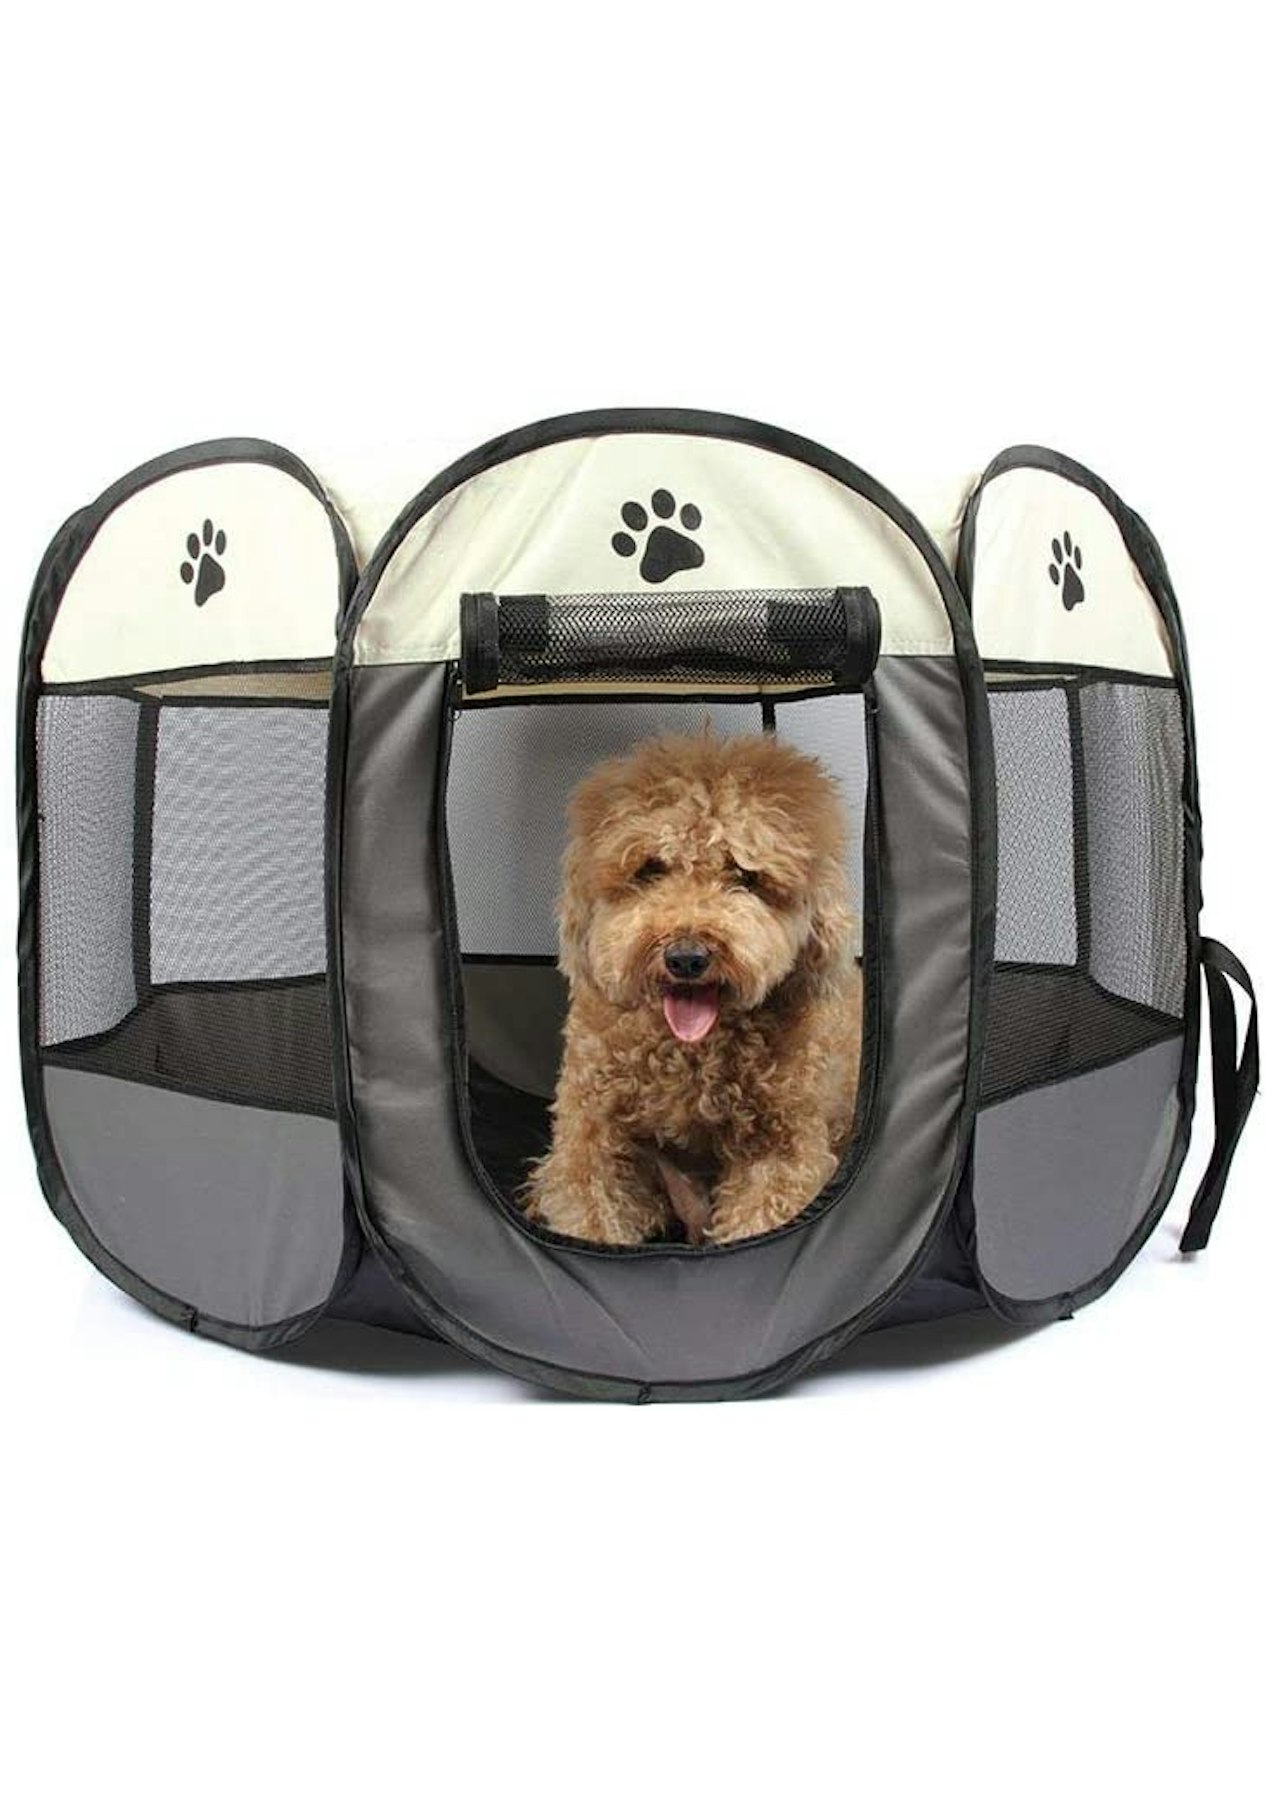 Portable Pets Tent Indoor & Outdoor HORING Dog playpens Large Pen Kennel for Dogs Puppy Cats Rabbits Small Animals 